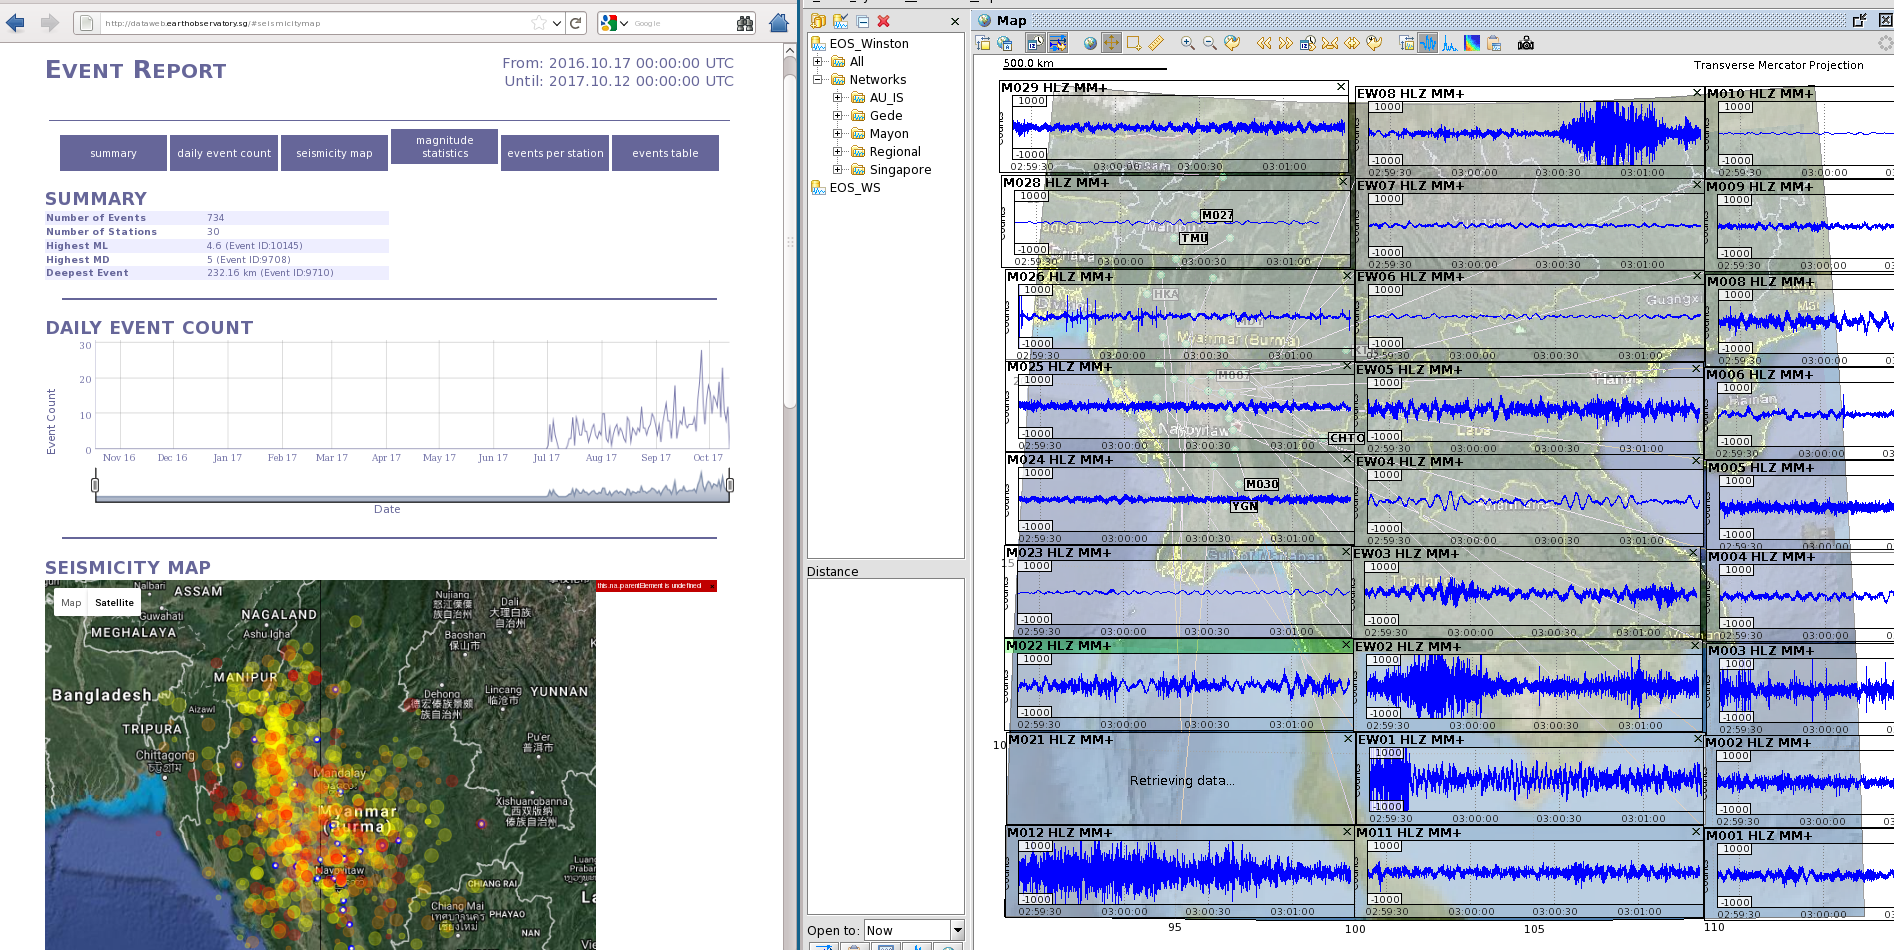 The seismic data is transferred real time by 3G telemetry to servers in Singapore and Nay Pyi Taw, Myanmar (Source: EOS)